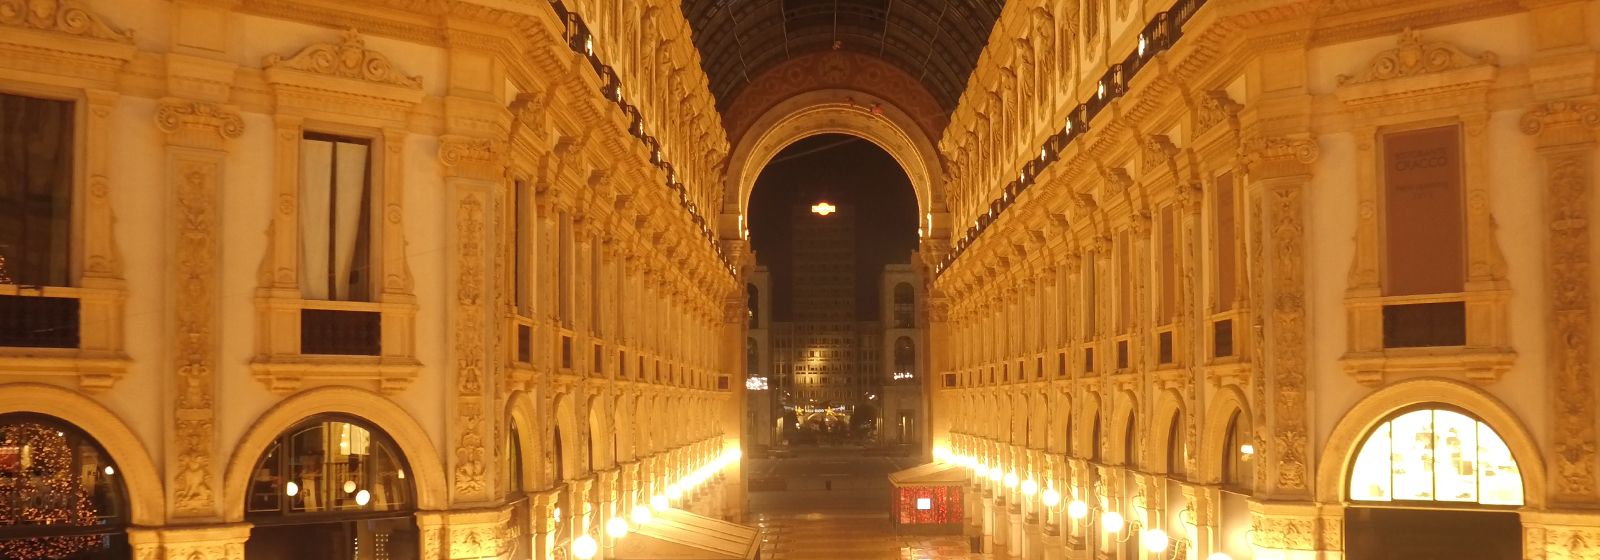 hotels in milan central